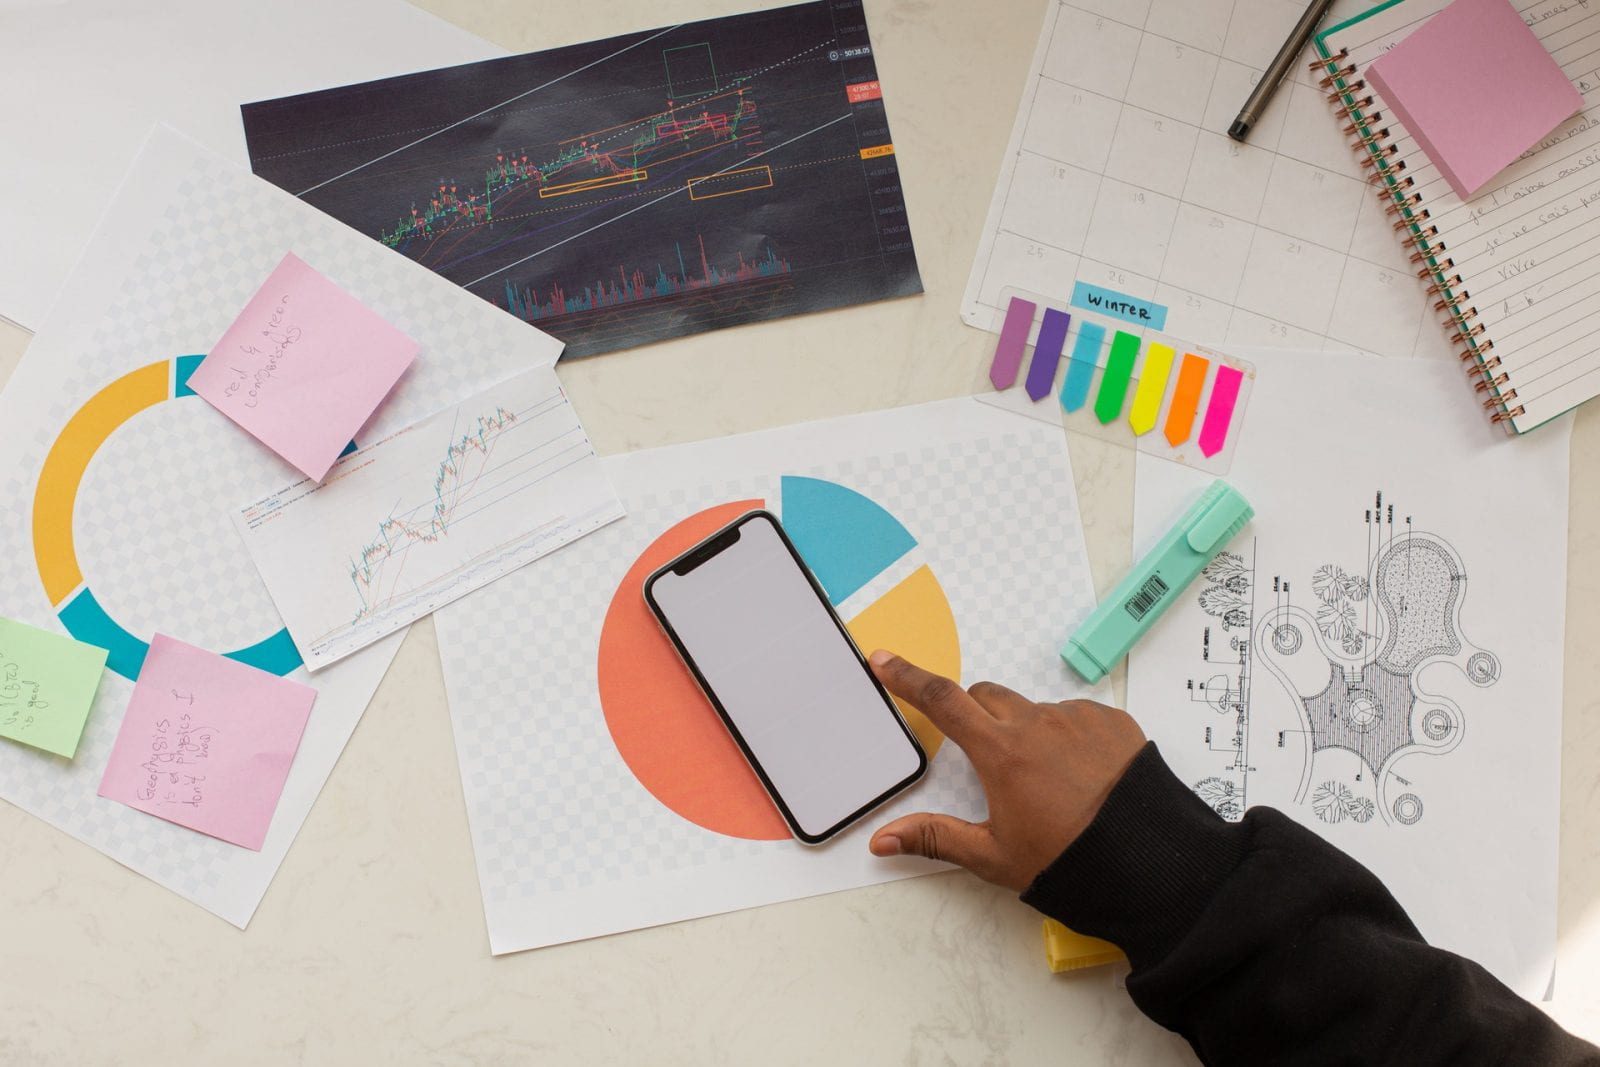 hand touching smart phone on desk, among colorful documents and supplies